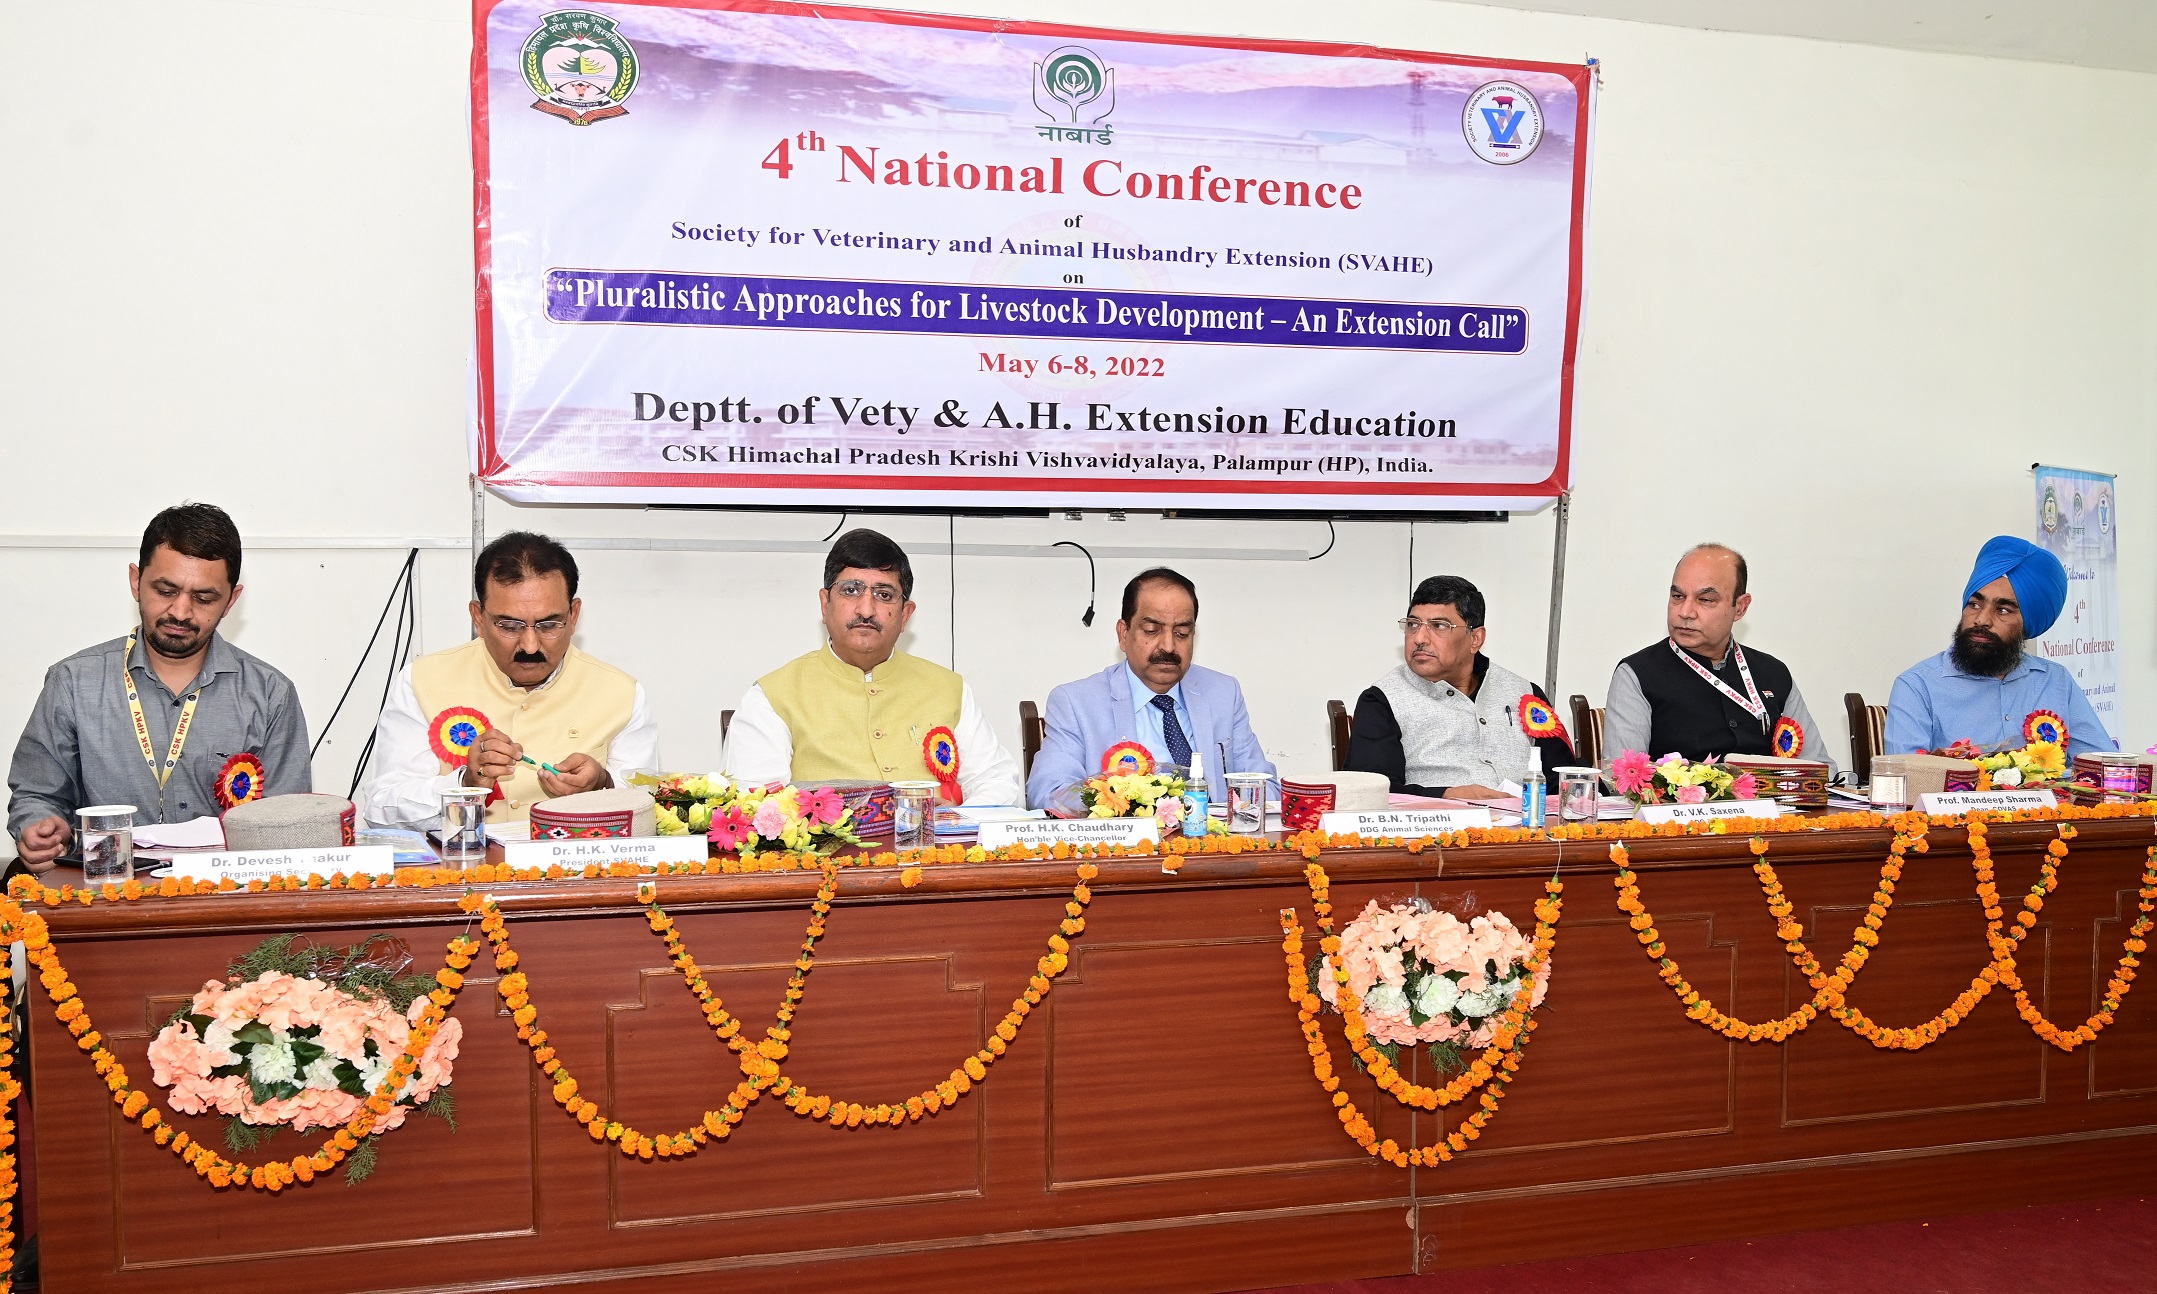 3-day conference on farm animals starts at CSK Himachal Pradesh Agricultural University